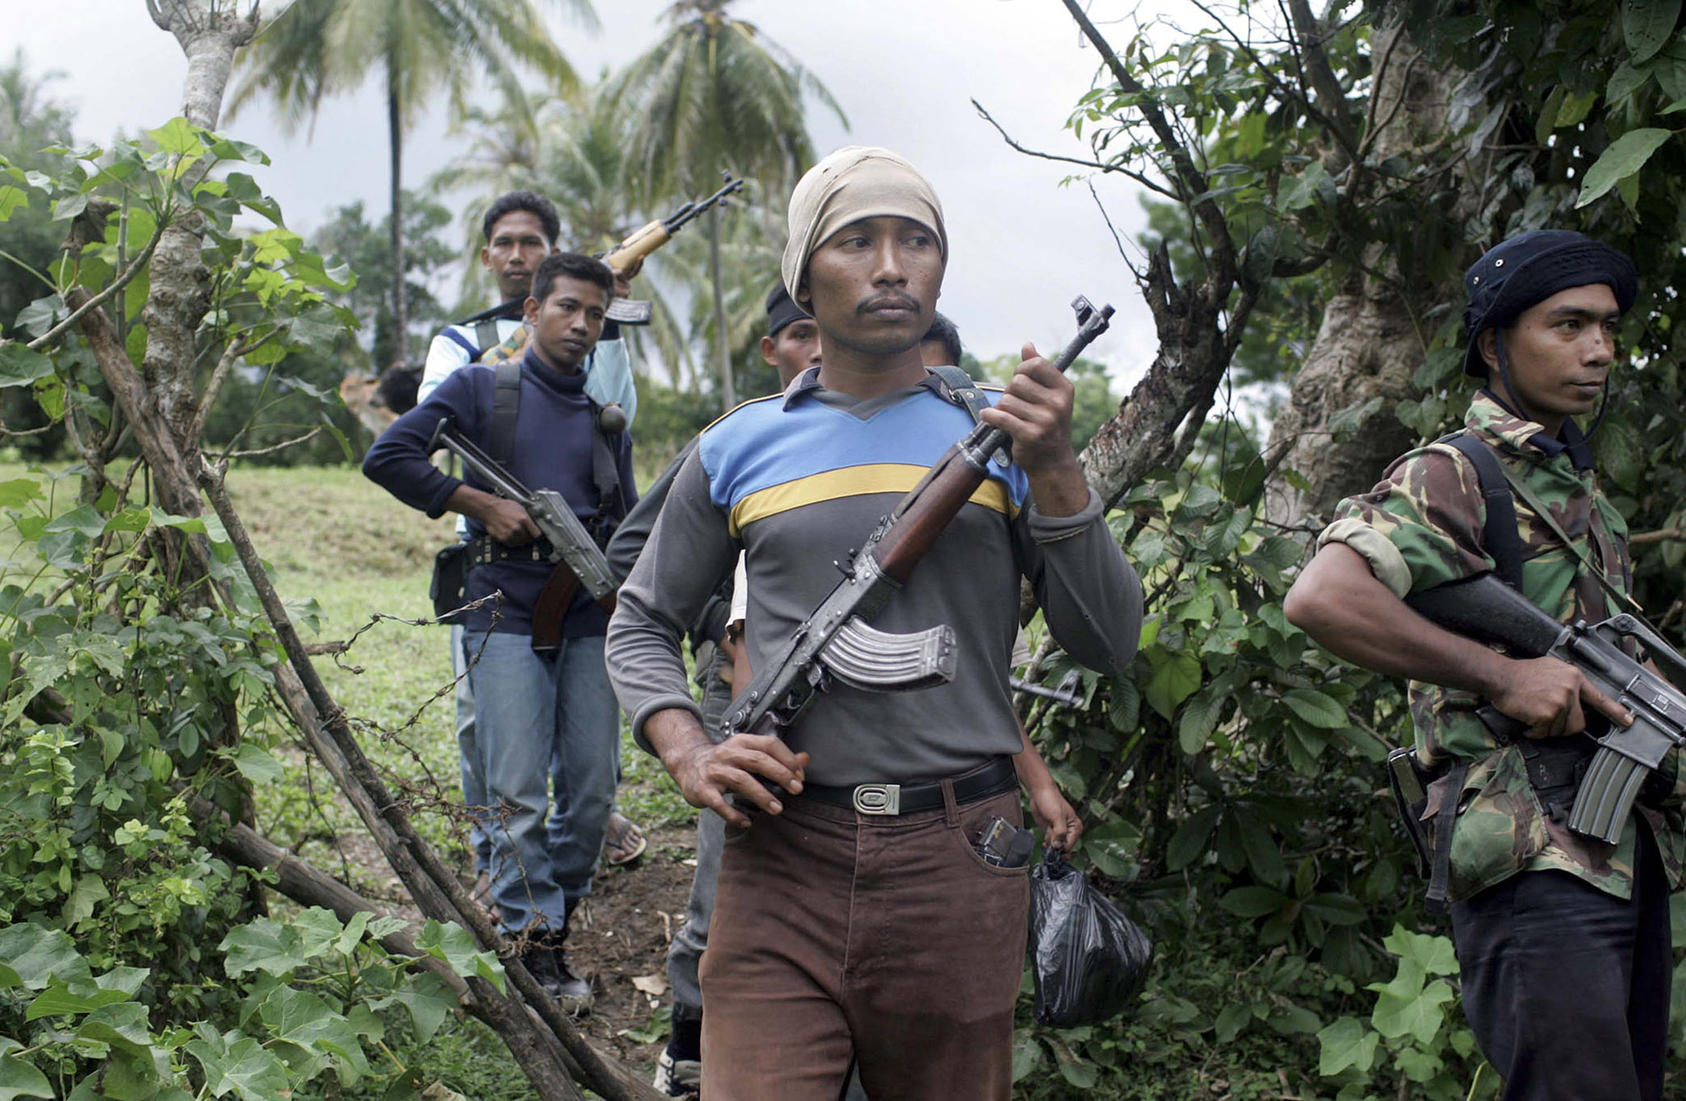 Separatist fighters in Aceh patrolled shortly before their leaders signed a 2005 peace accord with Indonesia’s government. The accord built was built on the two sides’ cooperation in response to the 2004 Indian Ocean tsunami. (Tyler Hicks/New York Times)